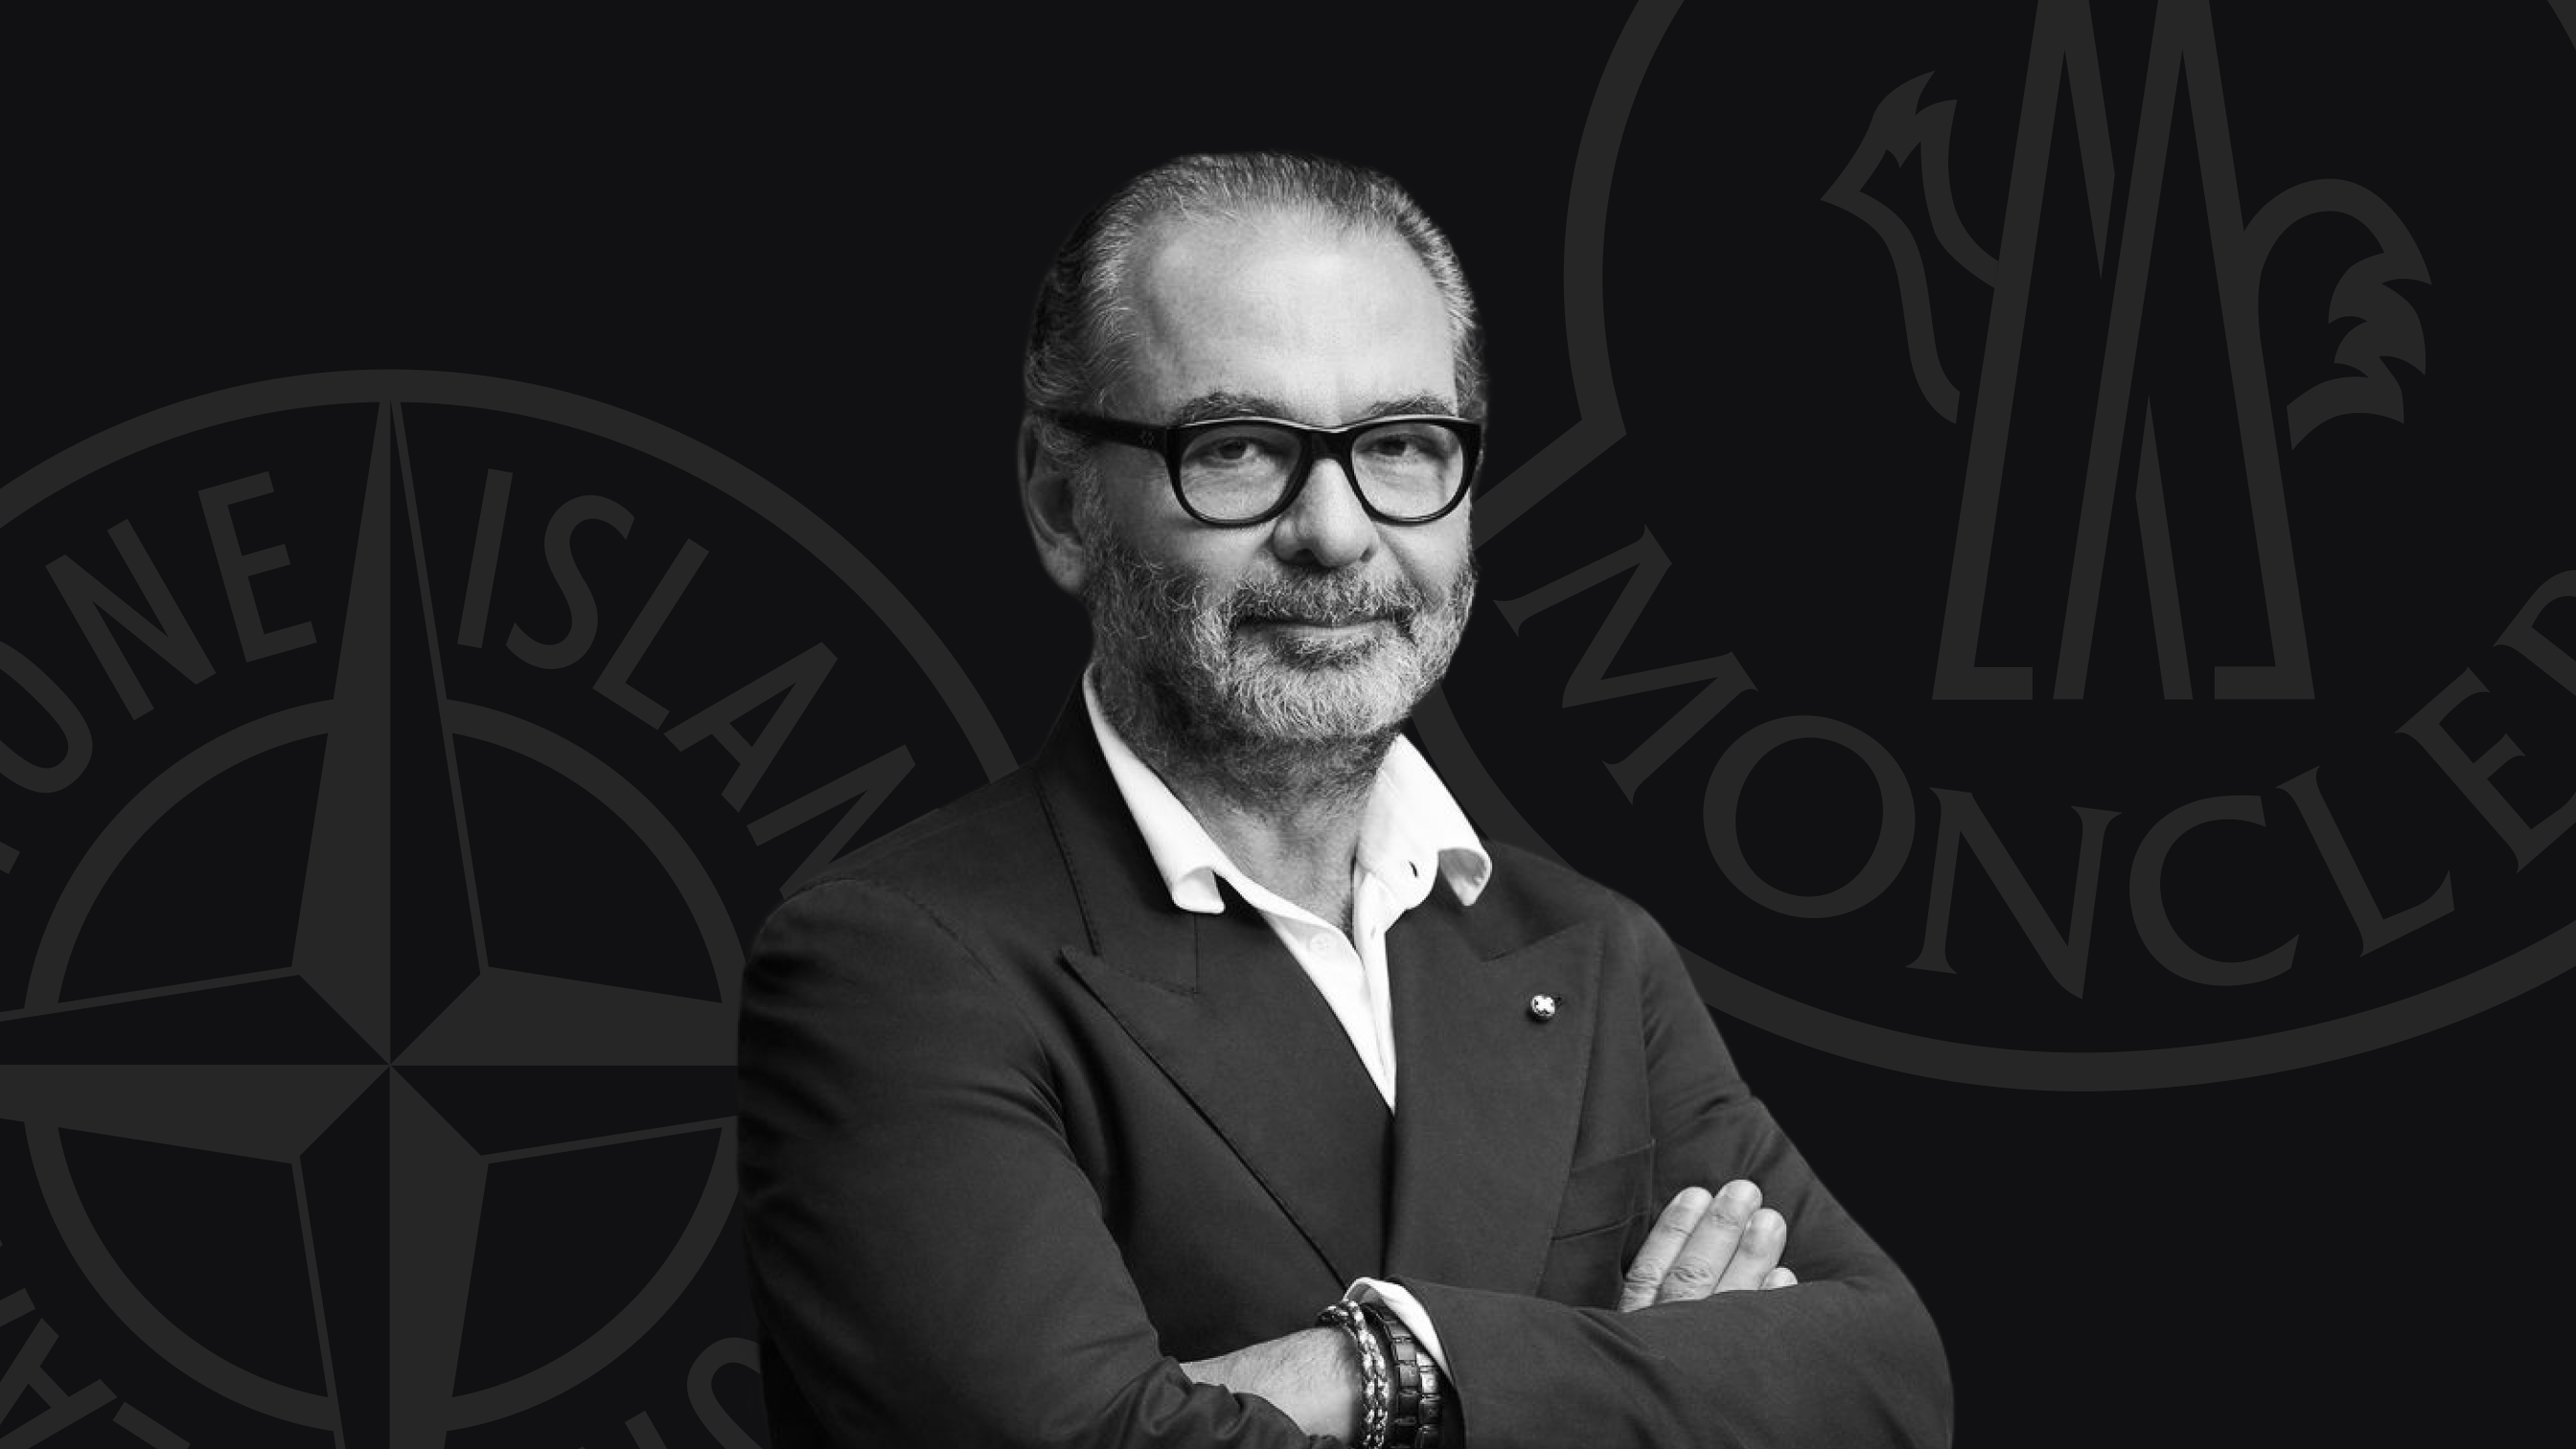 Remo Ruffini: CEO of Moncler and leading the acquisition of Stone Island